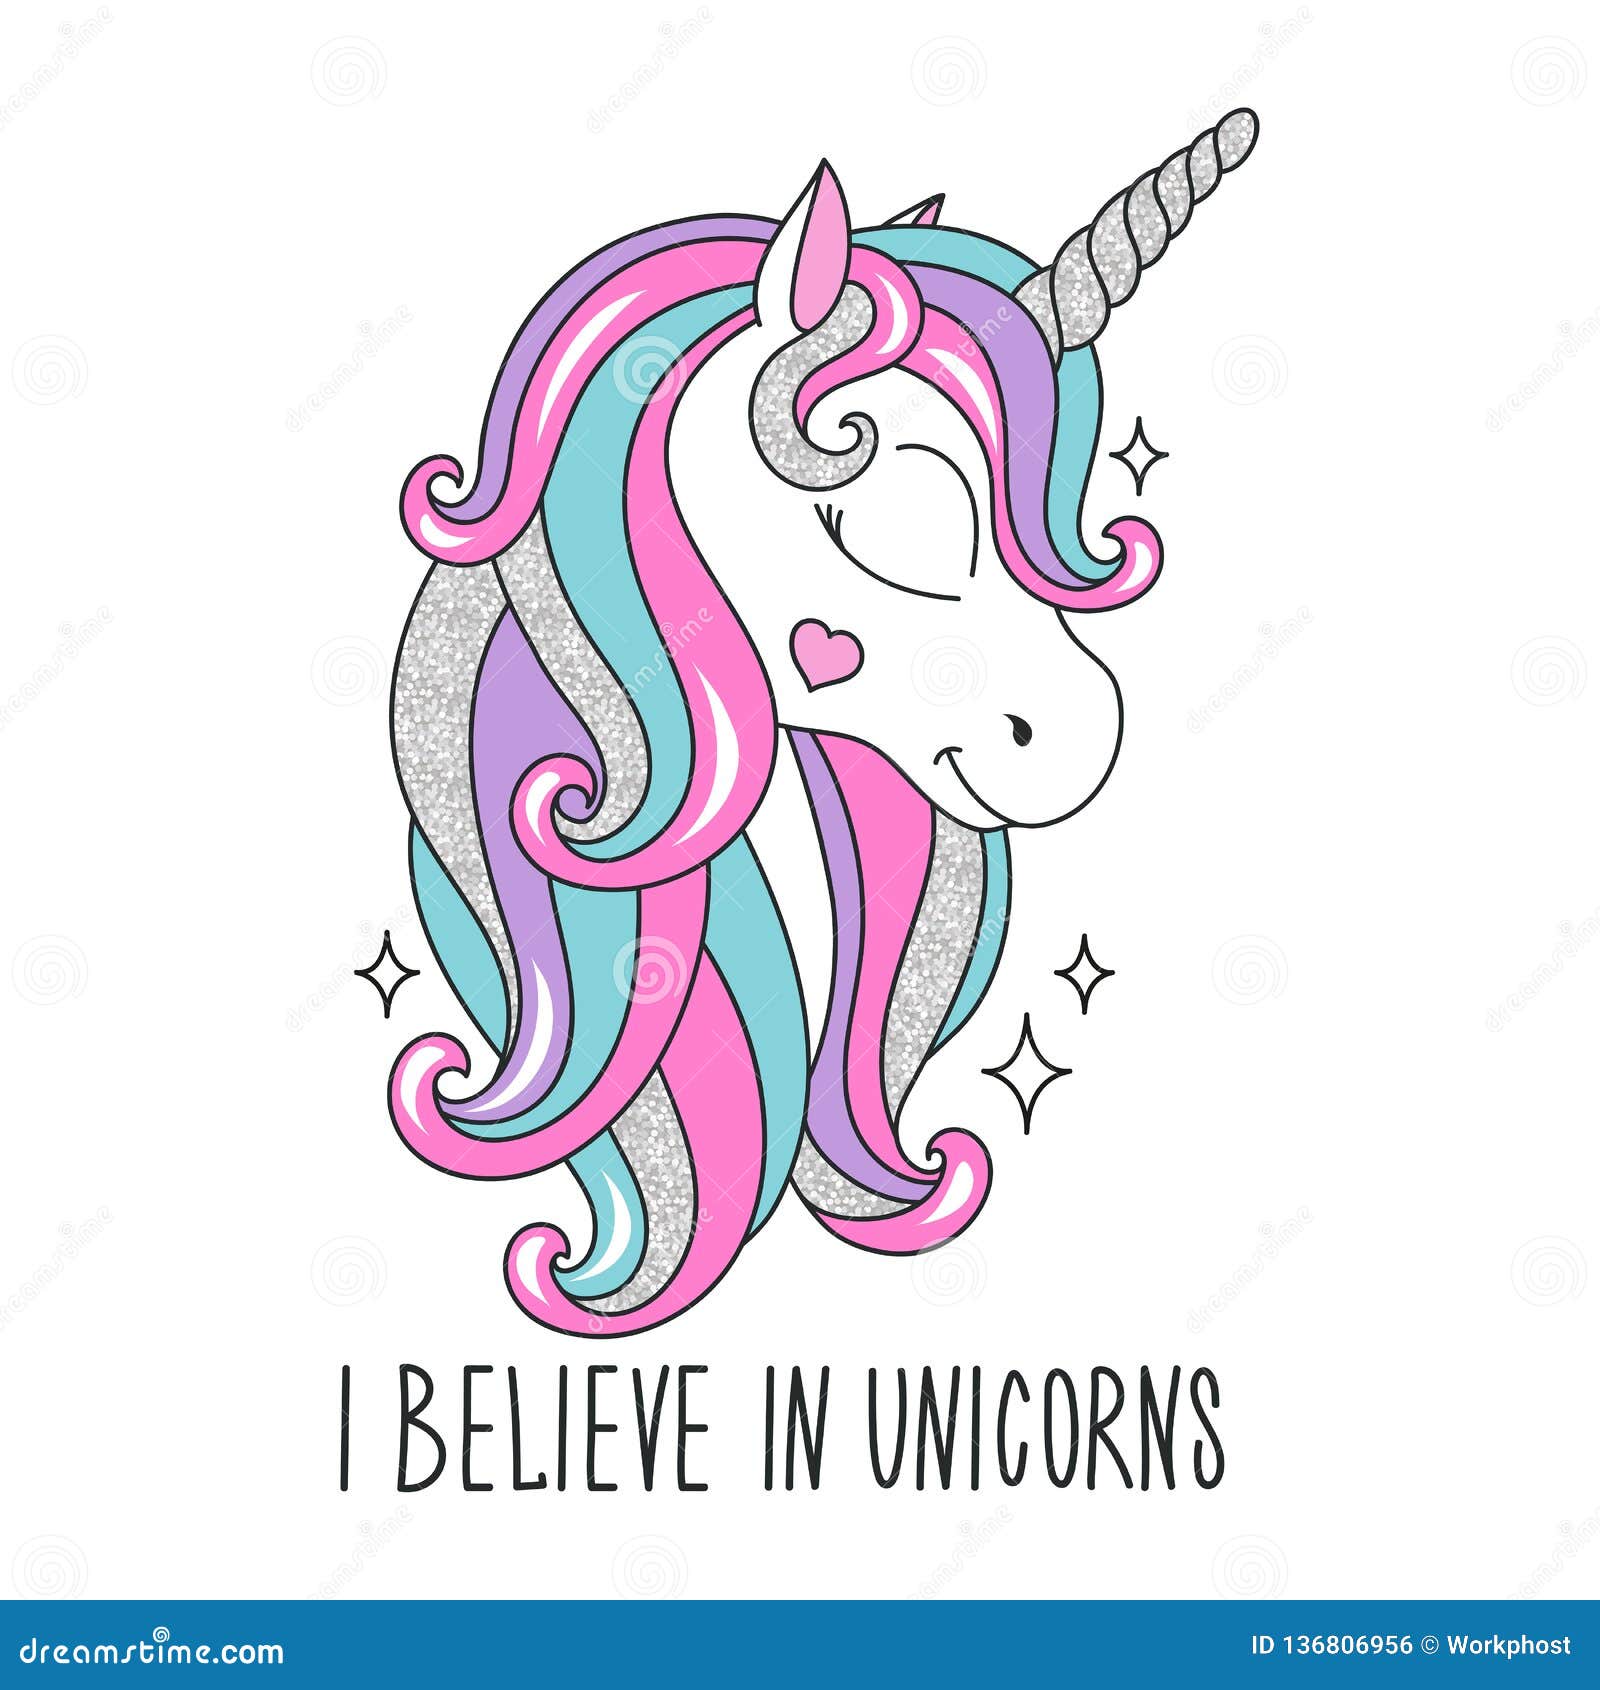 Art Glitter Unicorn Drawing For T Shirts I Believe In Unicorns Text Design For Kids Fashion Illustration Drawing In Modern Stock Illustration Illustration Of Paper Background